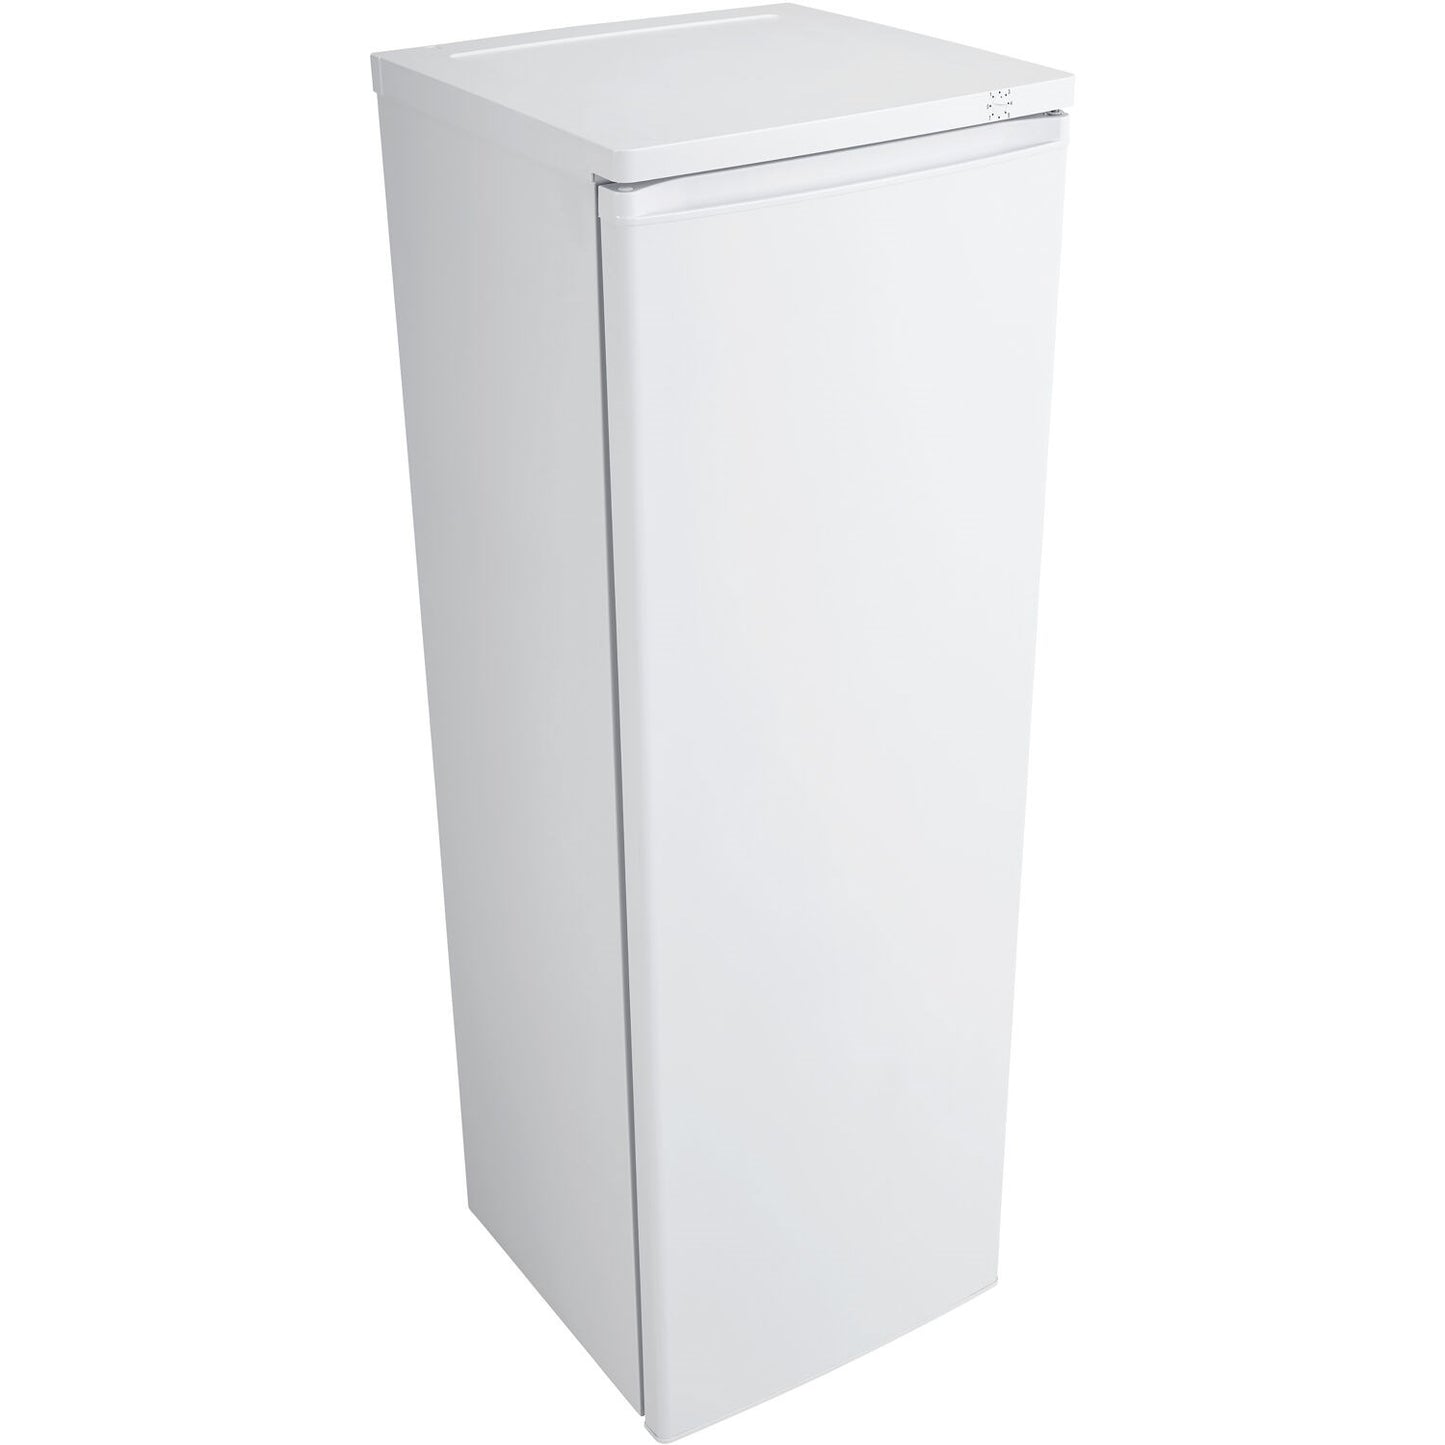 Danby 7.1 CuFt Upright Freezer | Manual Defrost | Mechanical Thermostat